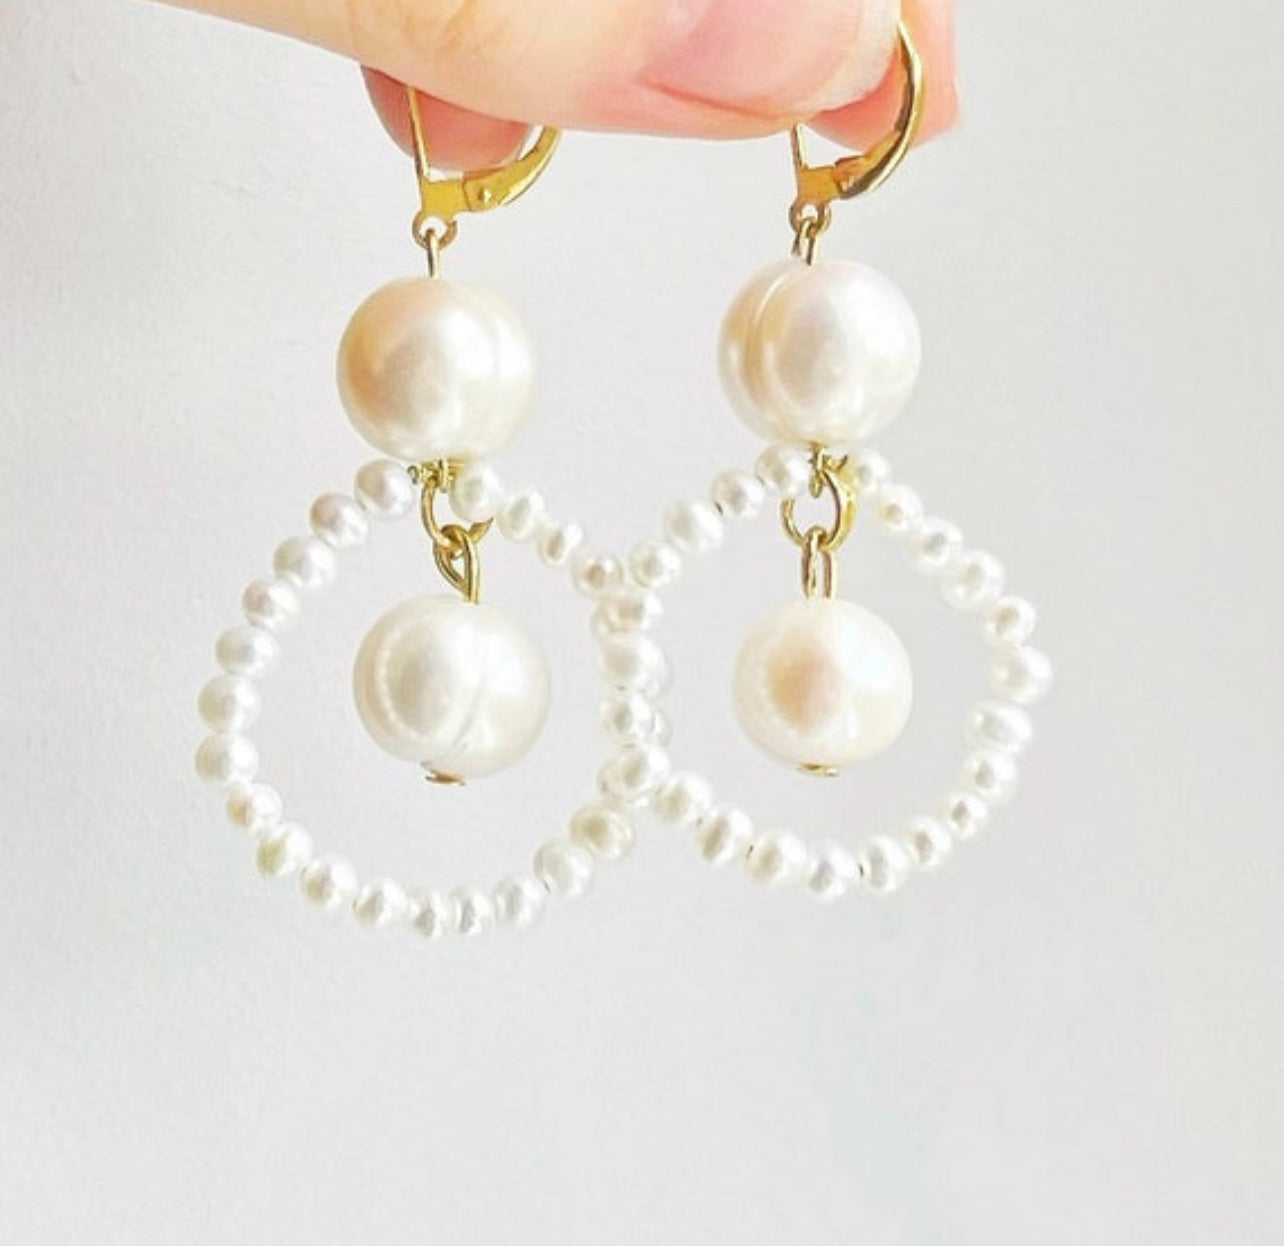 Elegant pearl dangle and drop earrings with white freshwater pearls, pearl bridal earrings, bridesmaid jewelry gifts